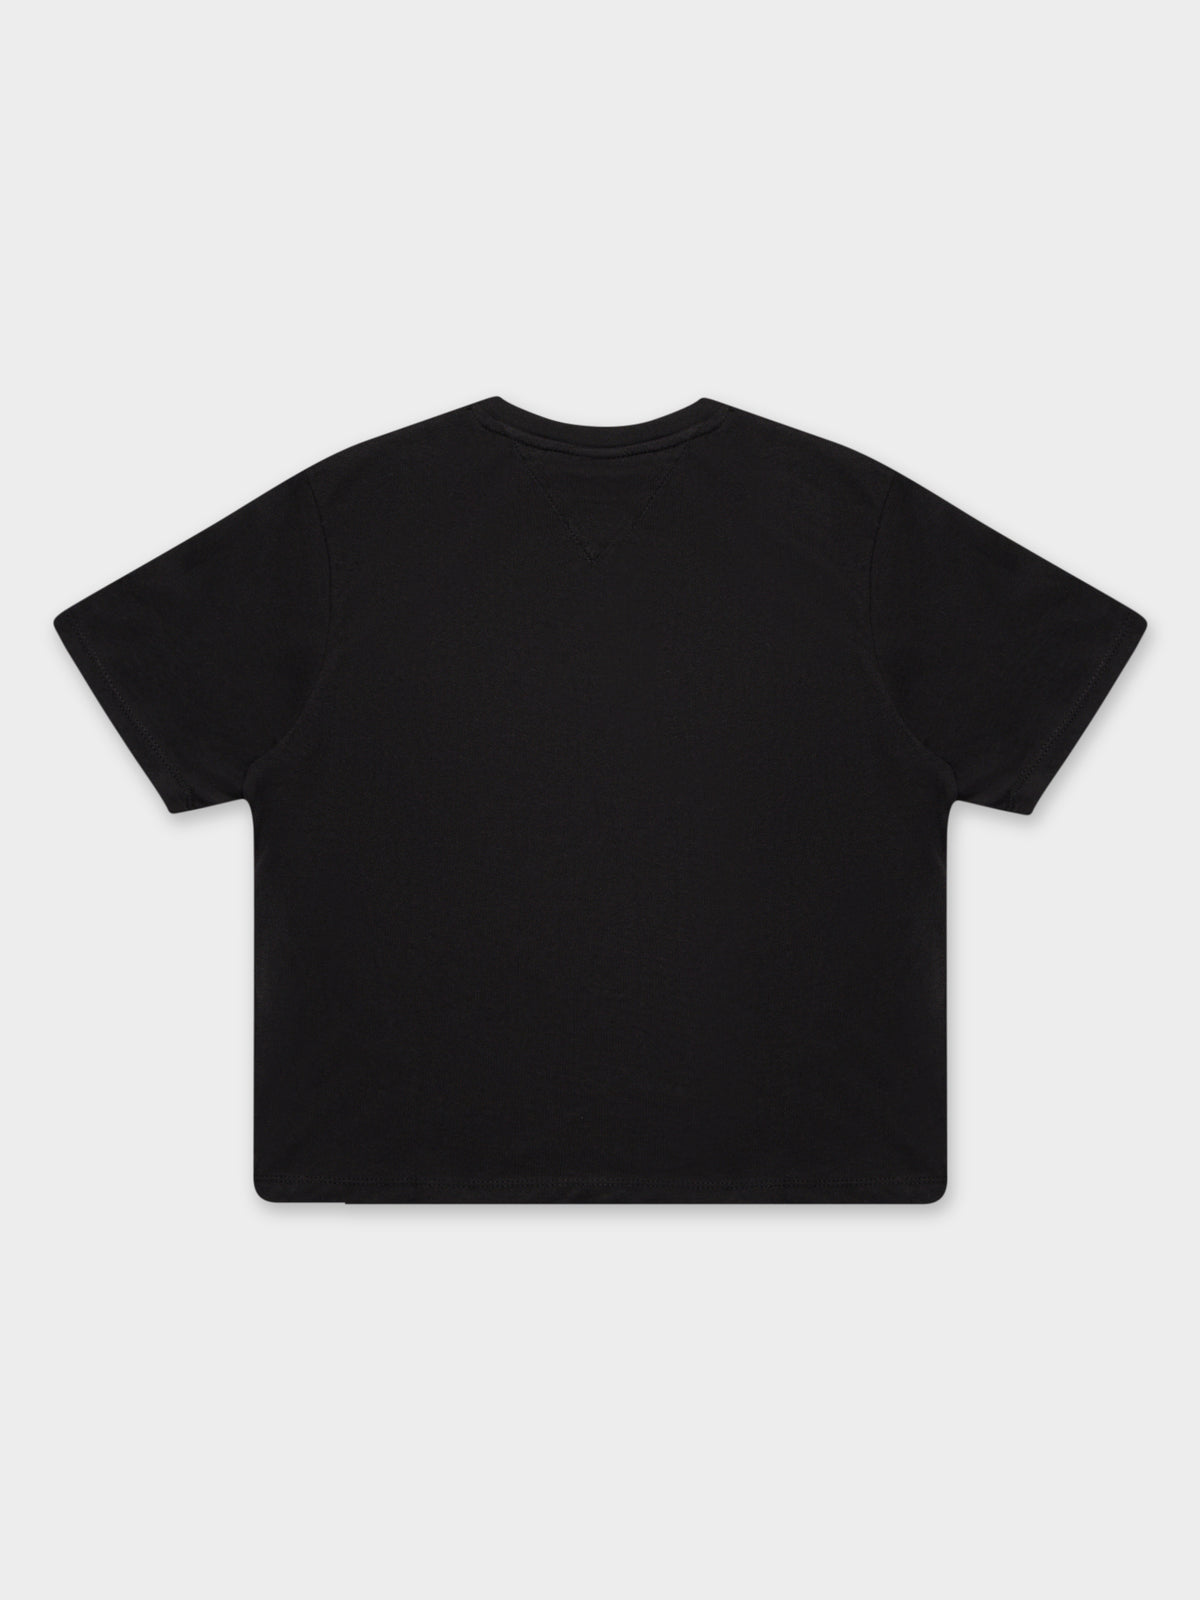 Boxy Cropped T-Shirt in Black